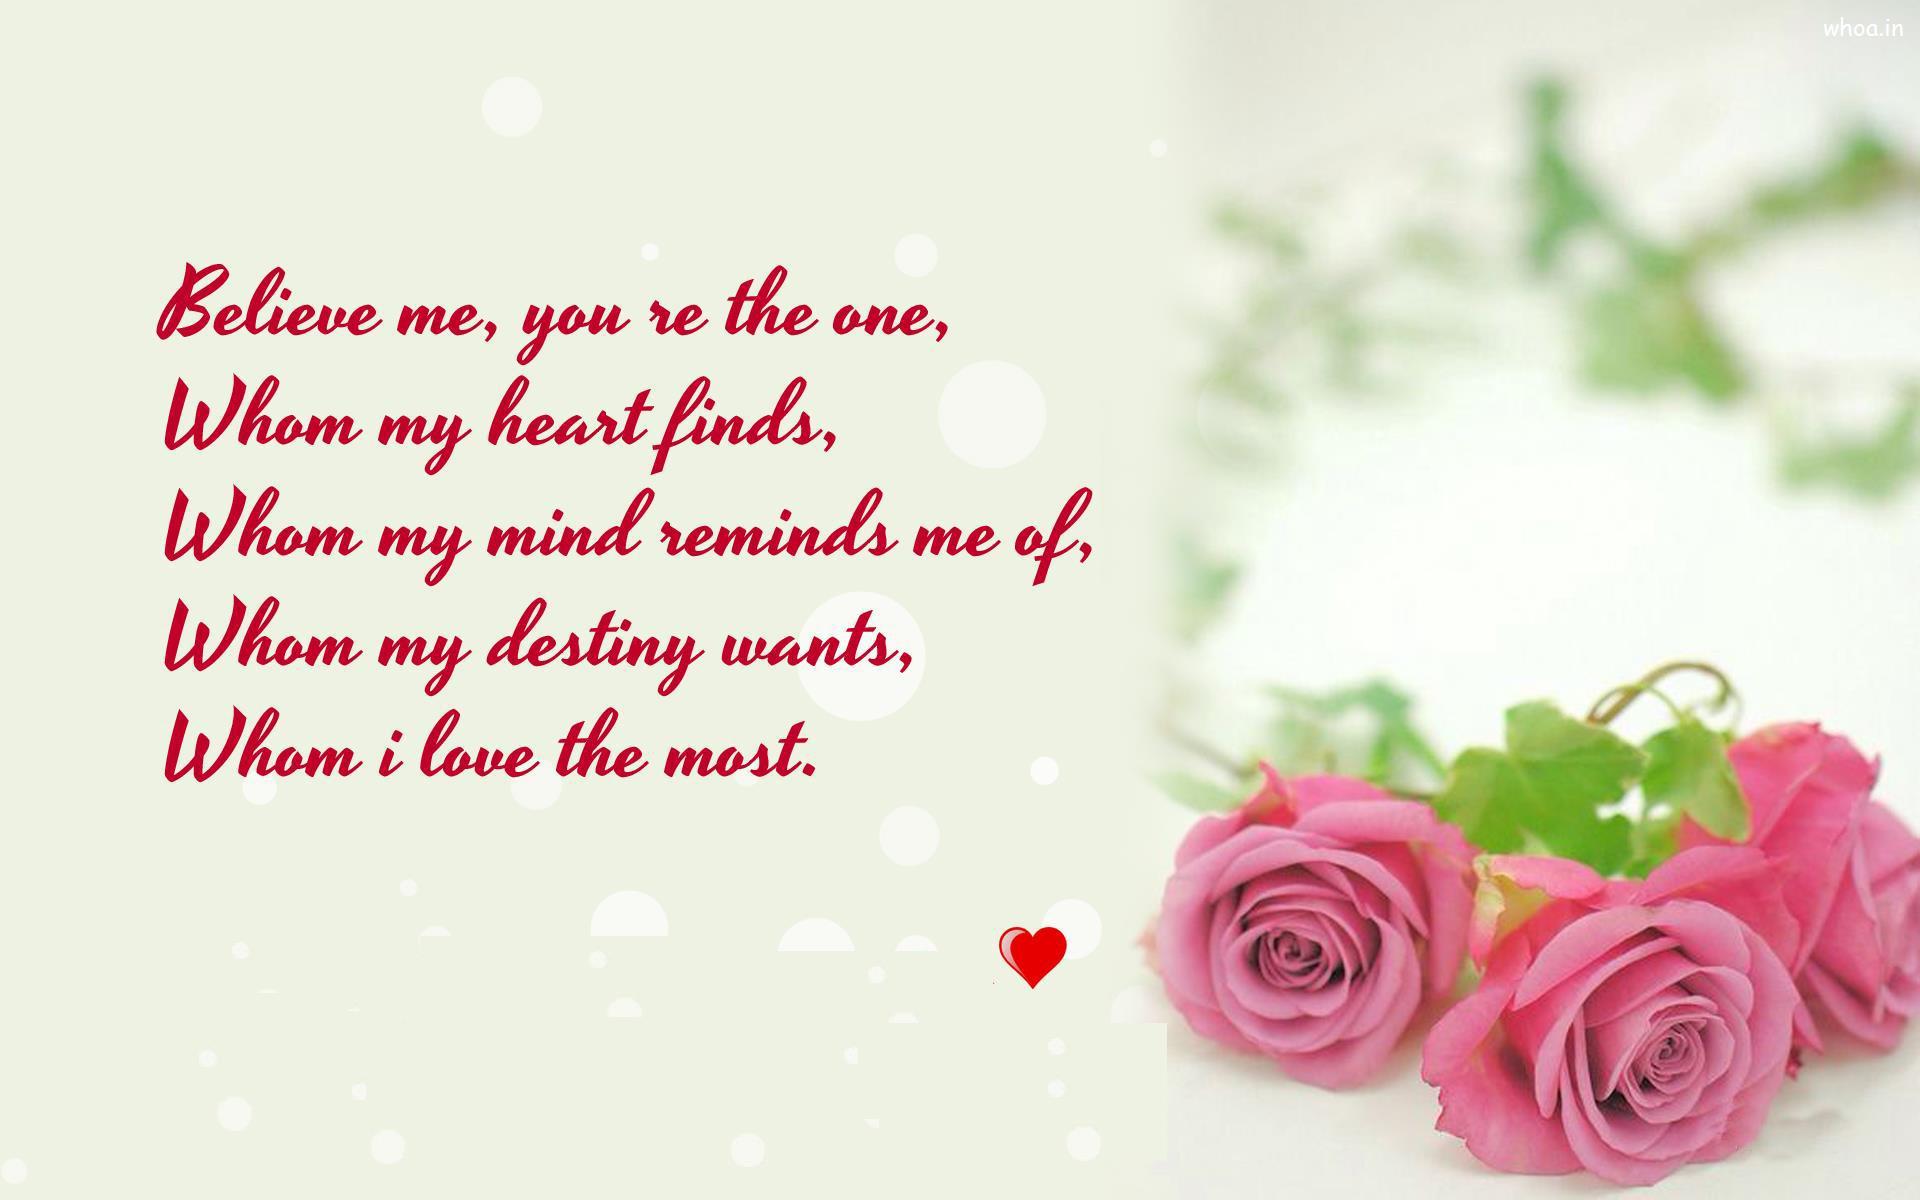 Love messages and romantic images for Android - APK Download